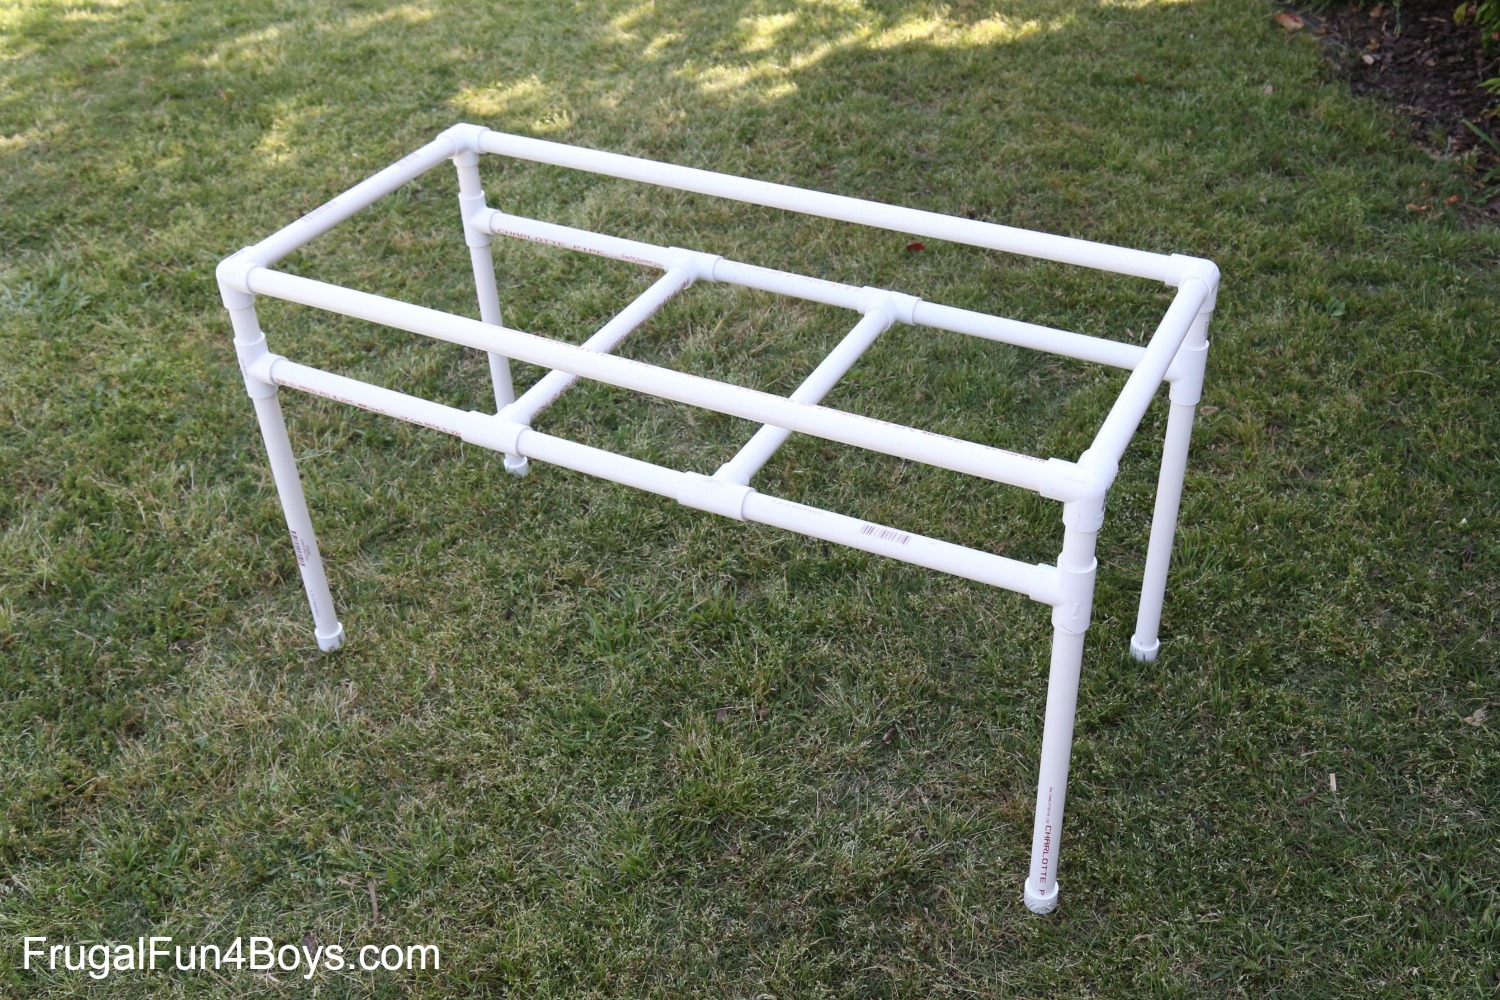 How to Build a PVC Pipe Sand and Water Table